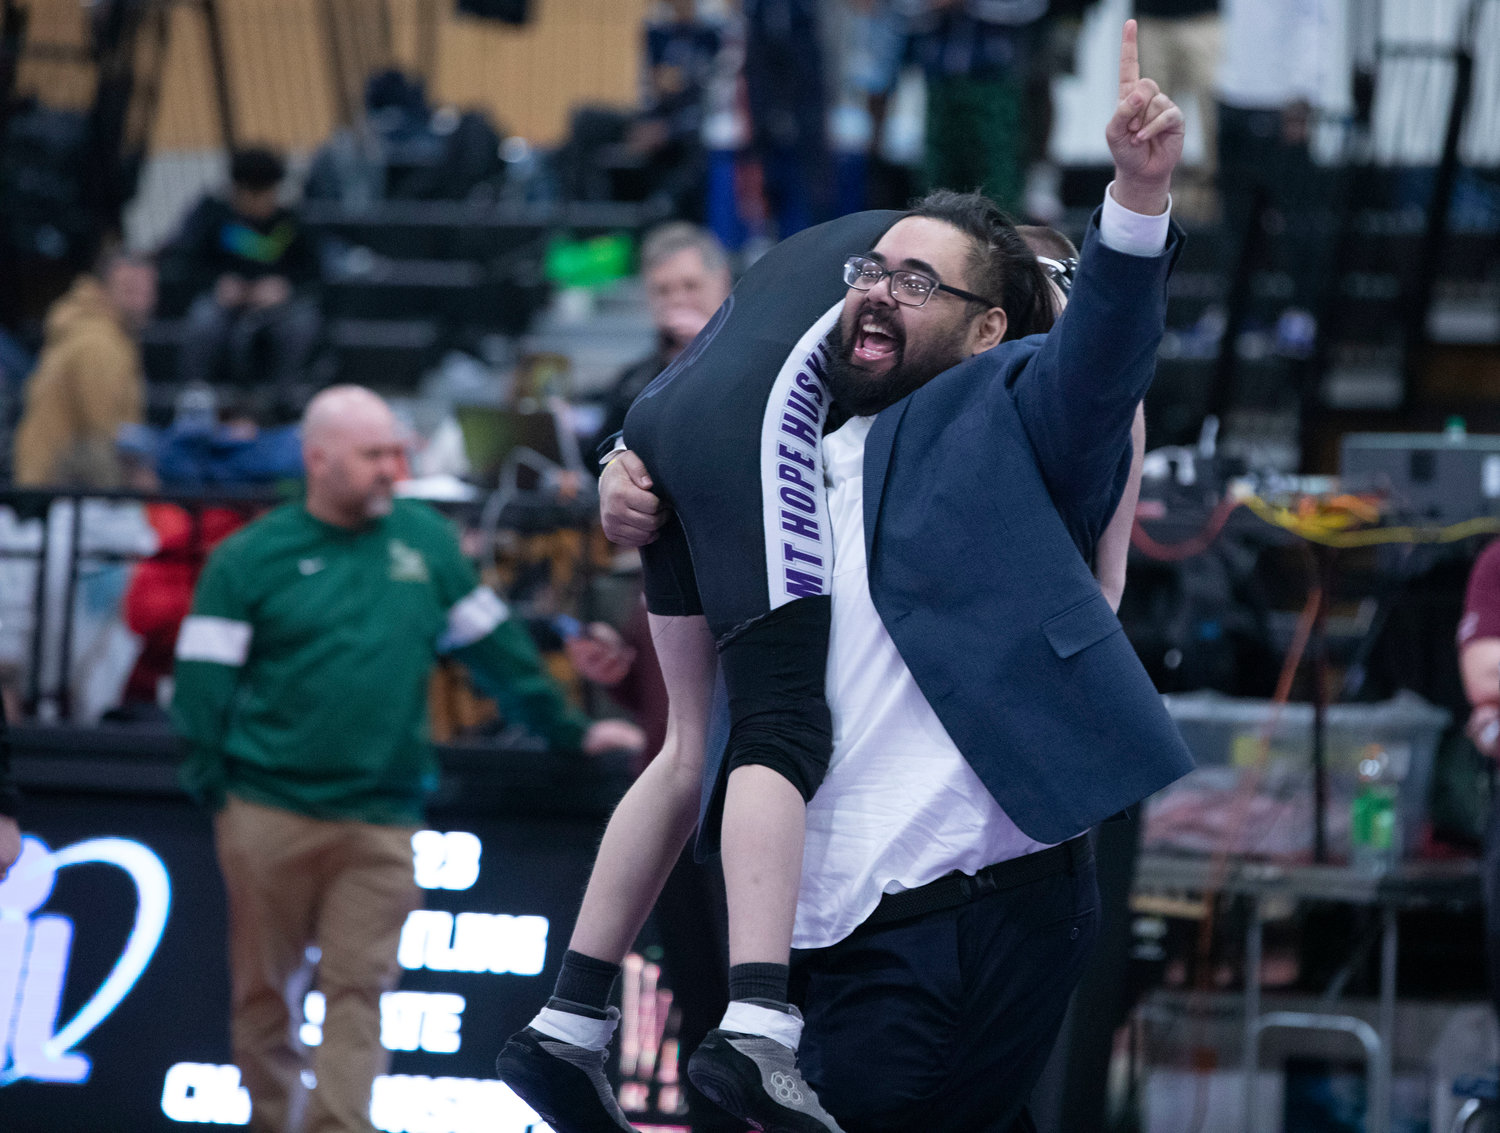 Head coach Ryan Fazzi hoists Andrew McCarthy over his shoulder and holds up a number one sign after McCarthy beat Stone Farnsworth of Coventry by a 3-1 decision to gain the 126-pound finals at the state tournament.